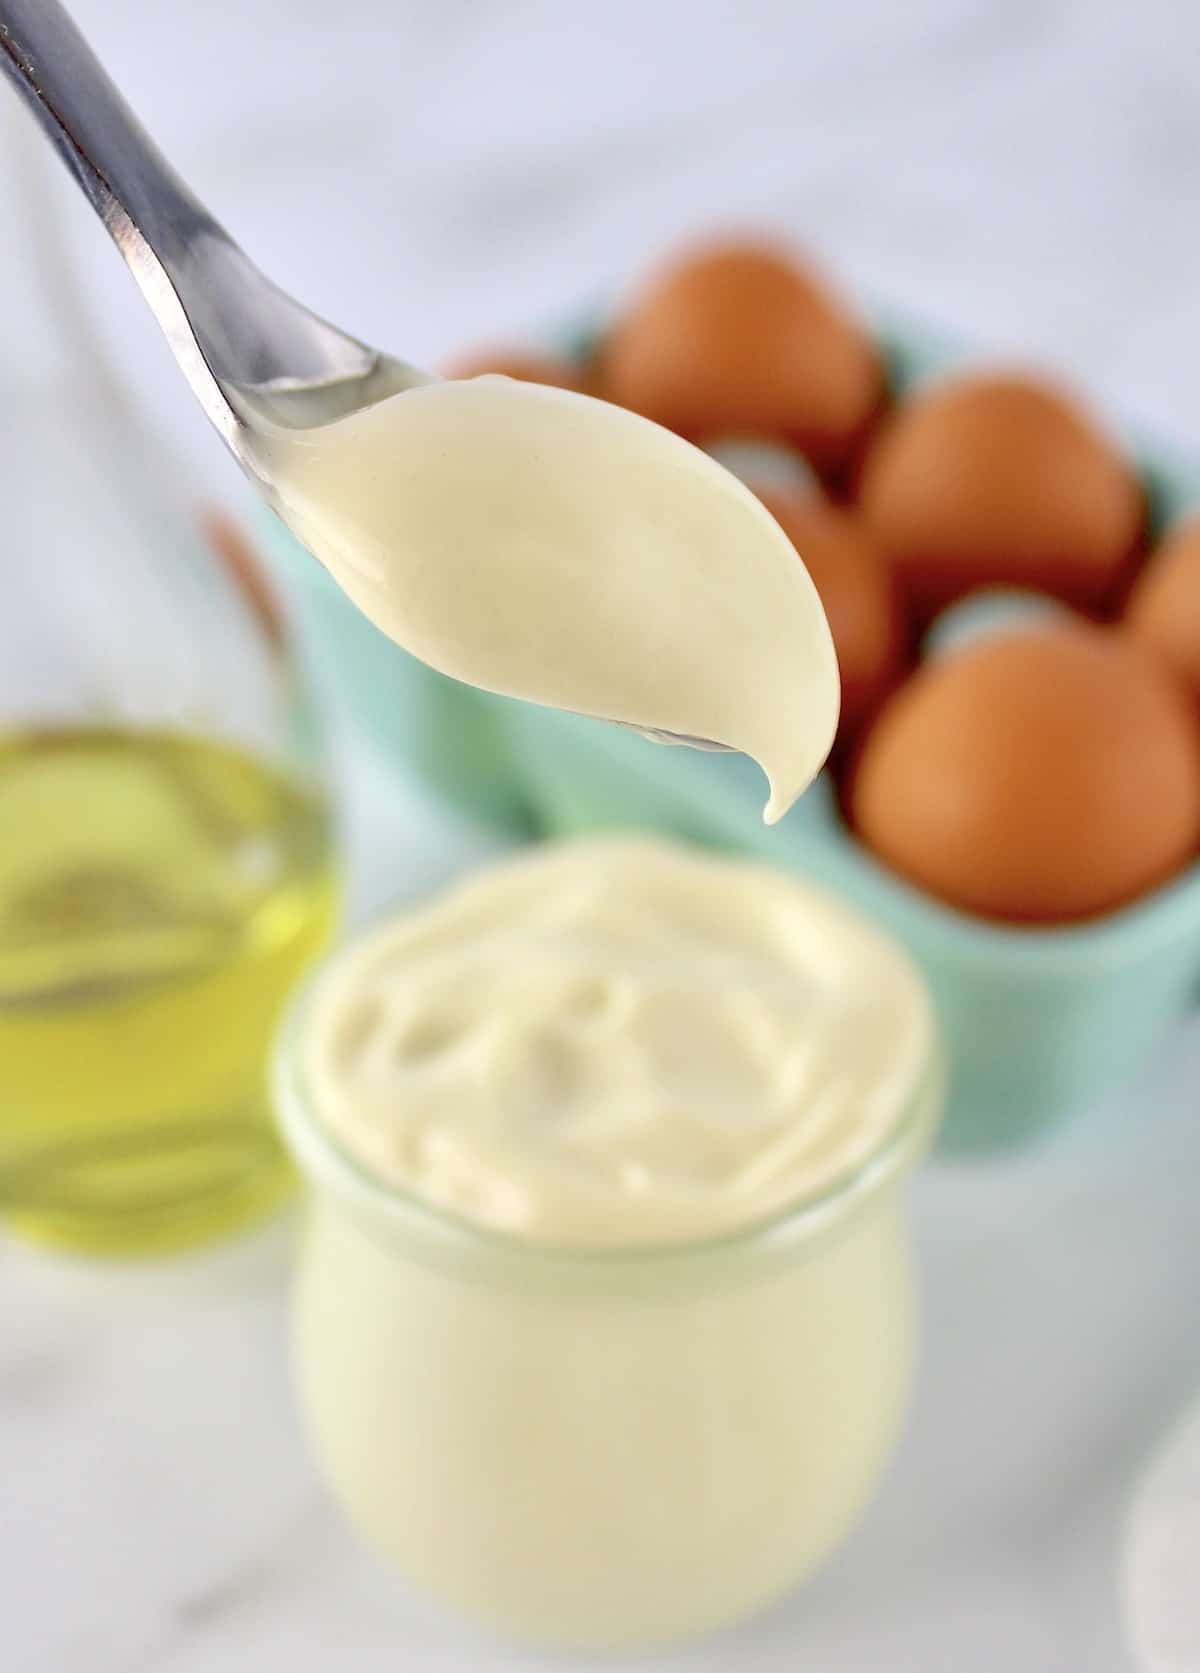 Easy Homemade Keto Mayonnaise being spooned out of open glass jar